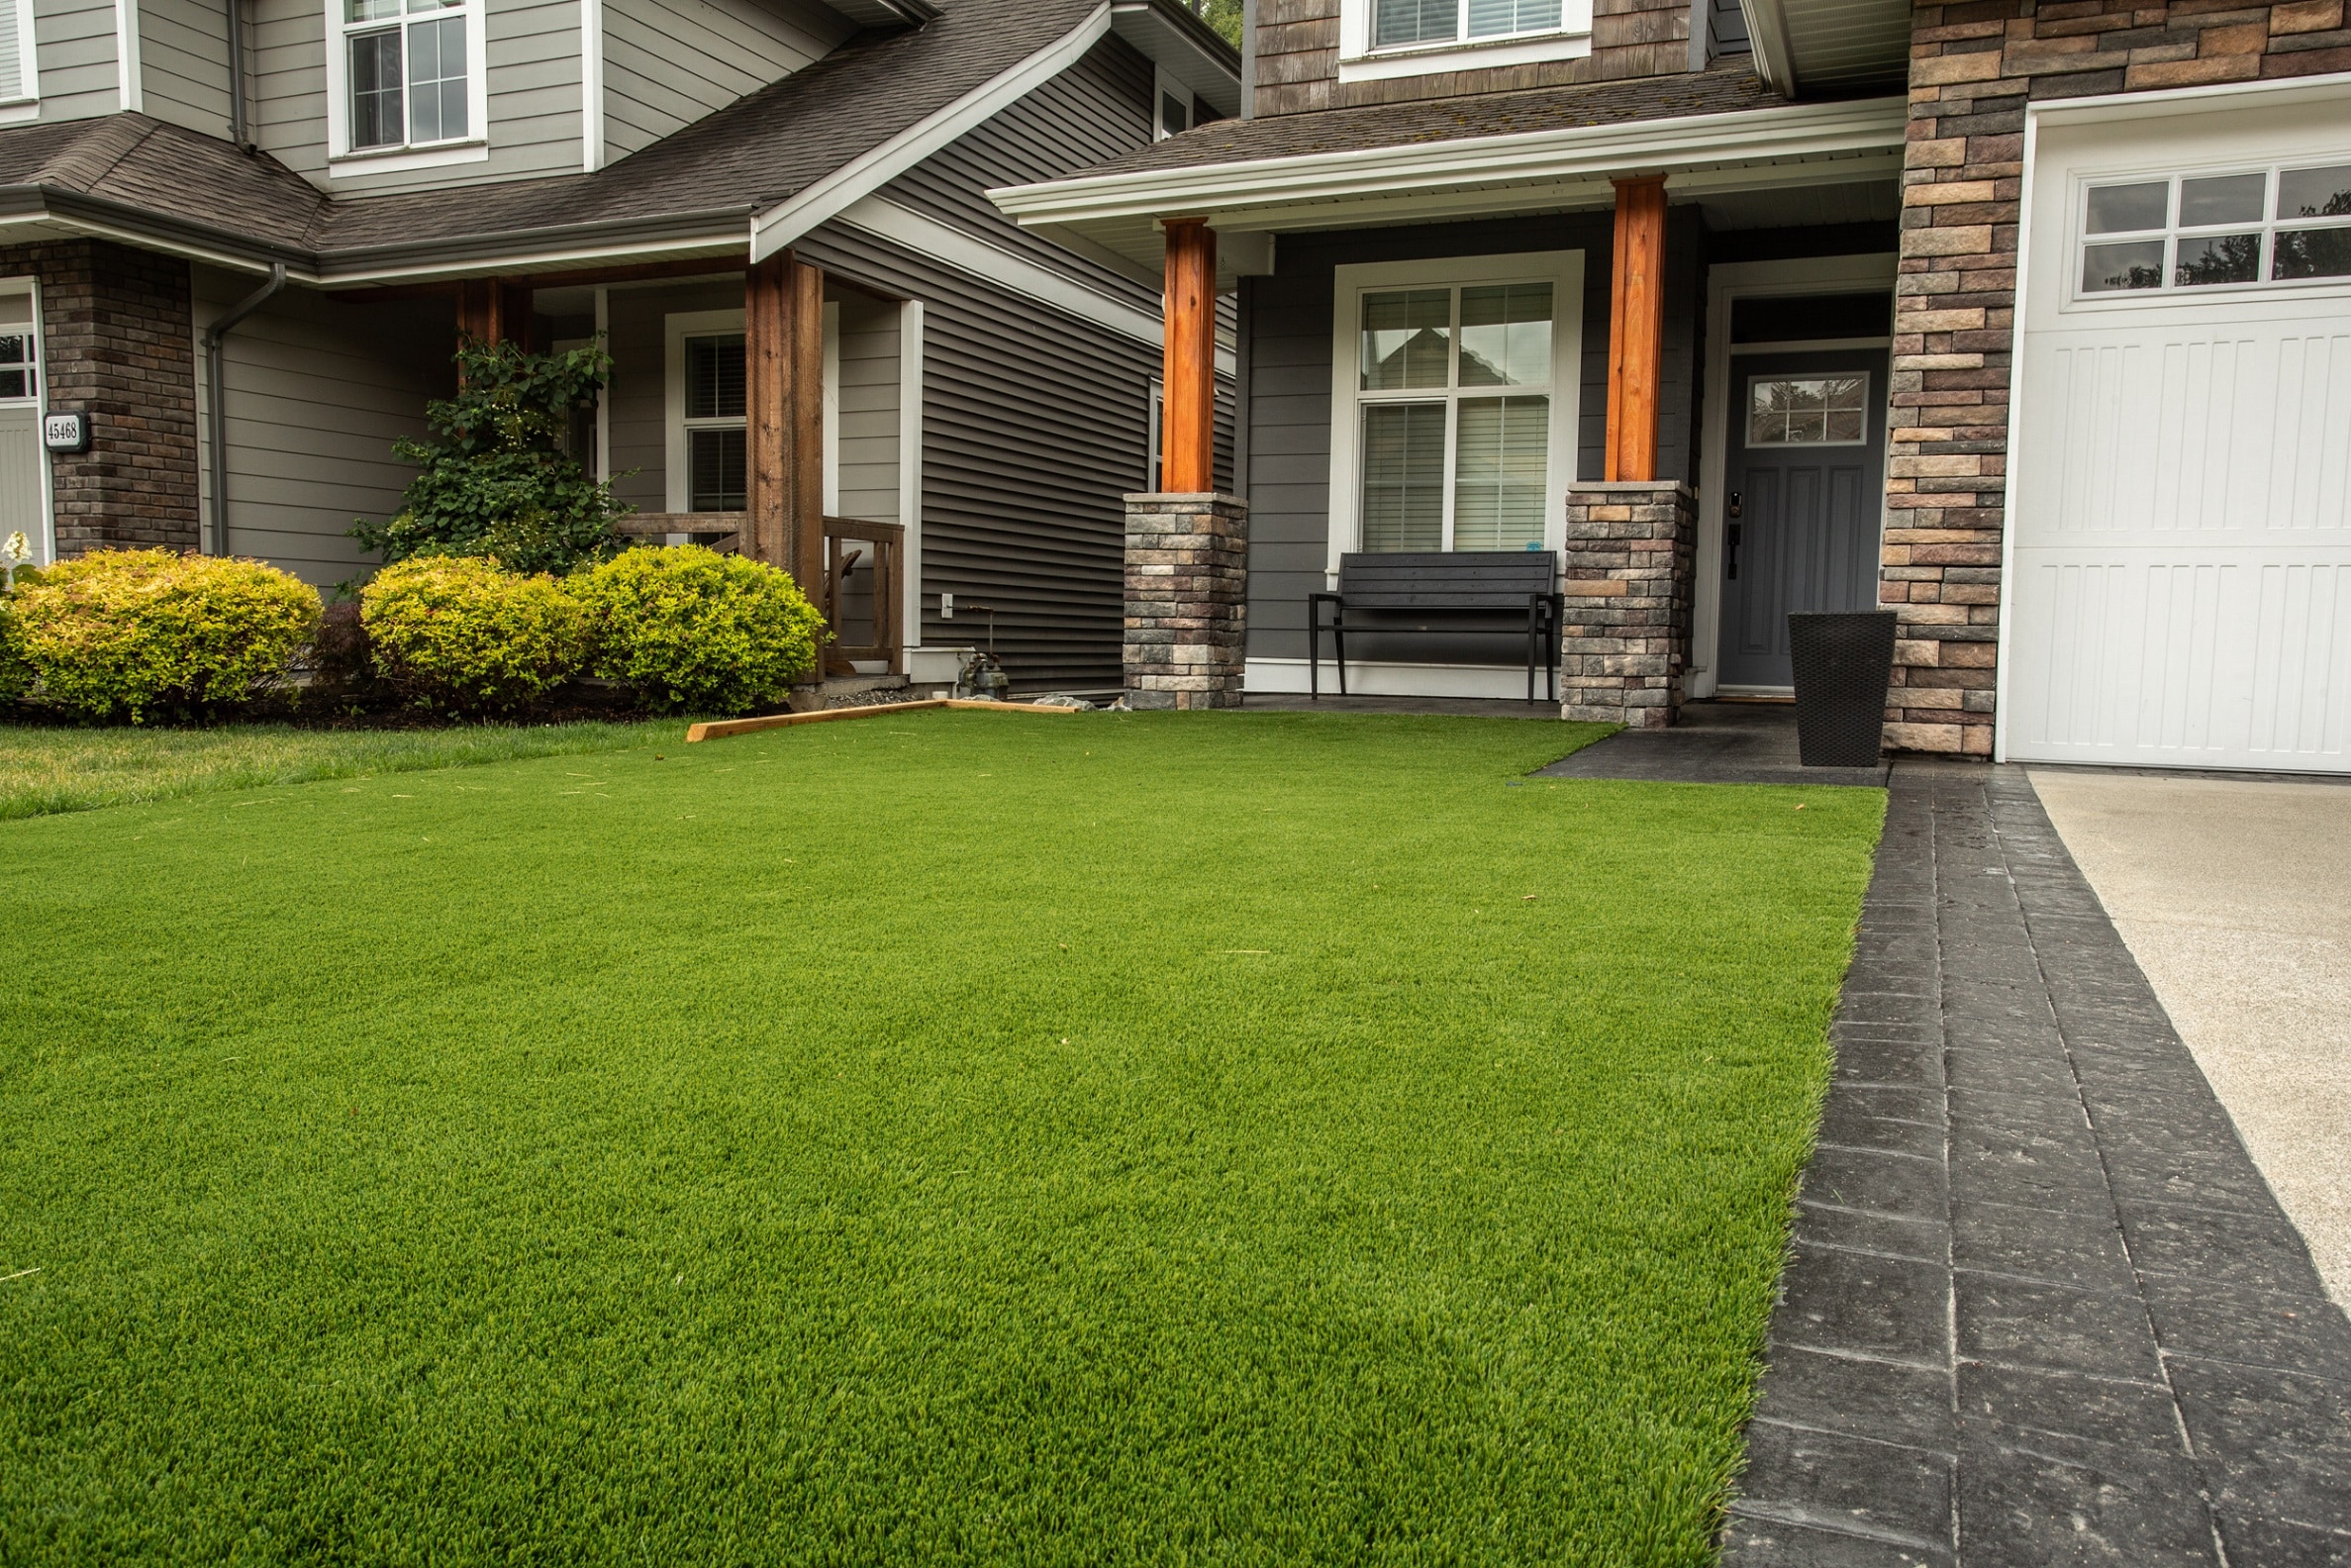 Premium Grass Blades: Chilliwack front yard using our signature natural looking turf: EverGlades